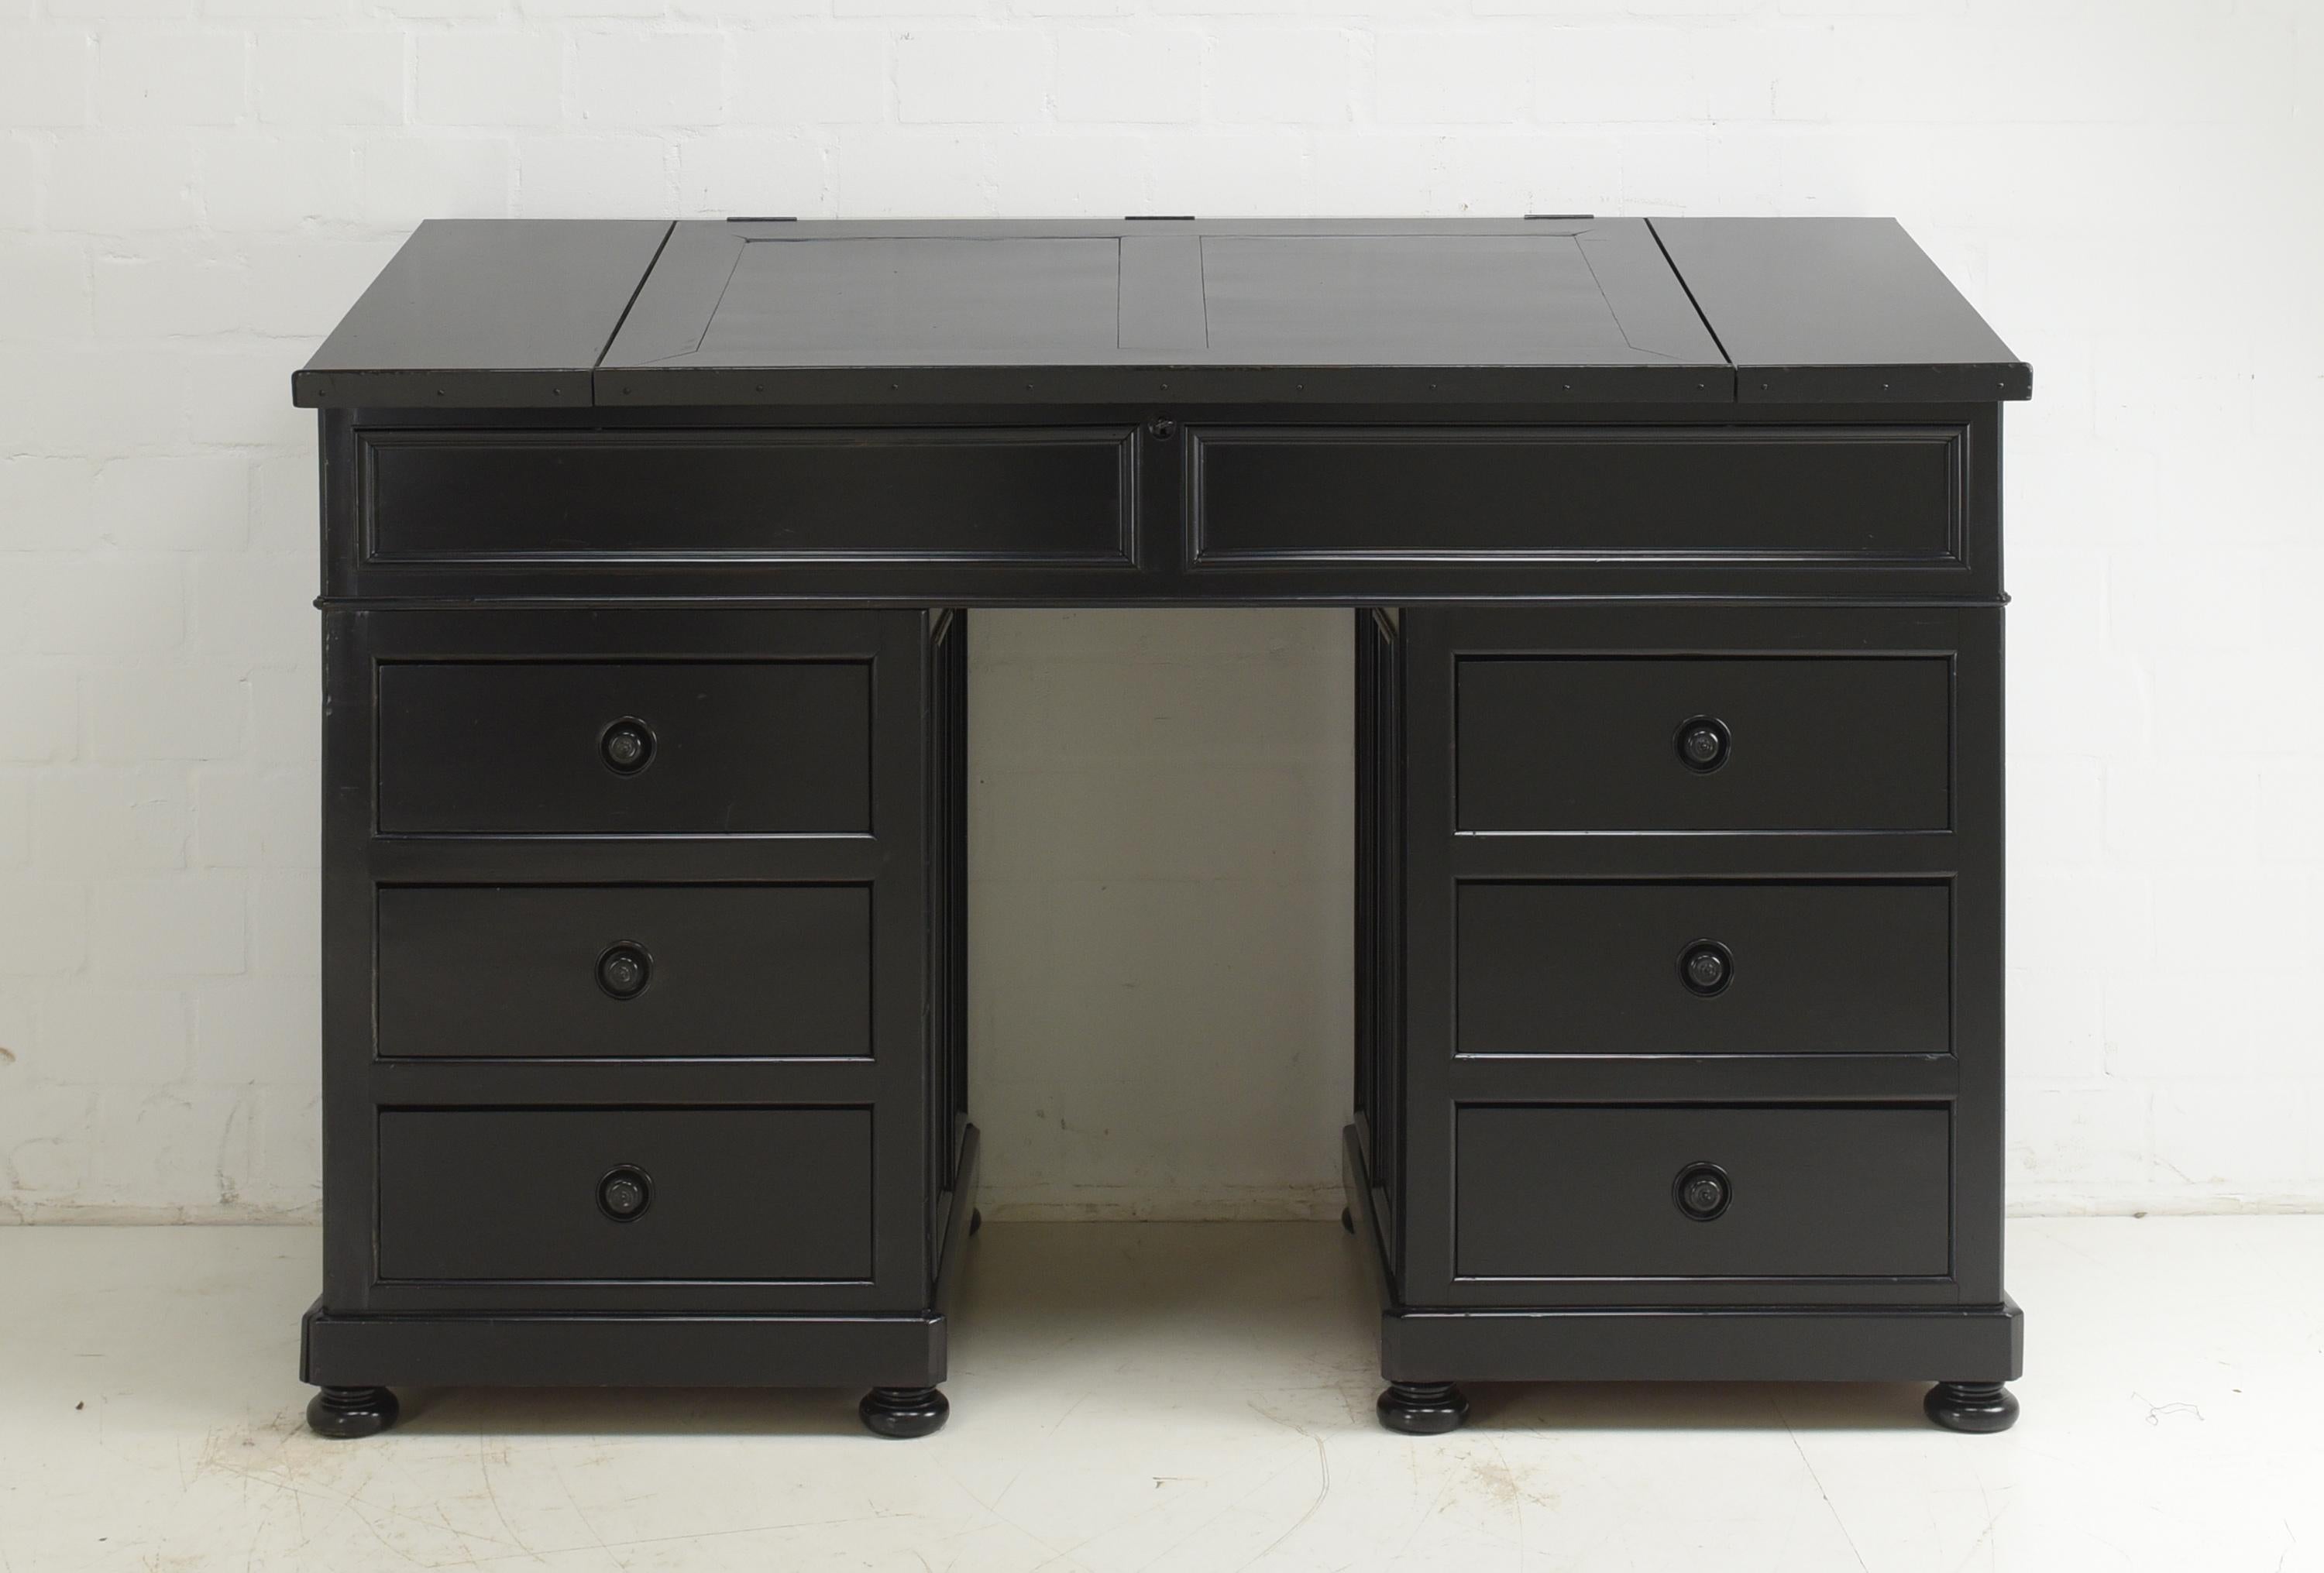 Large standing desk restored circa 1880 reception desk secretary desk

Features:
Painted black outside
Desk can be folded up in the middle with plenty of storage space underneath
Six drawers, dovetailed
High quality
Functional, timelessly